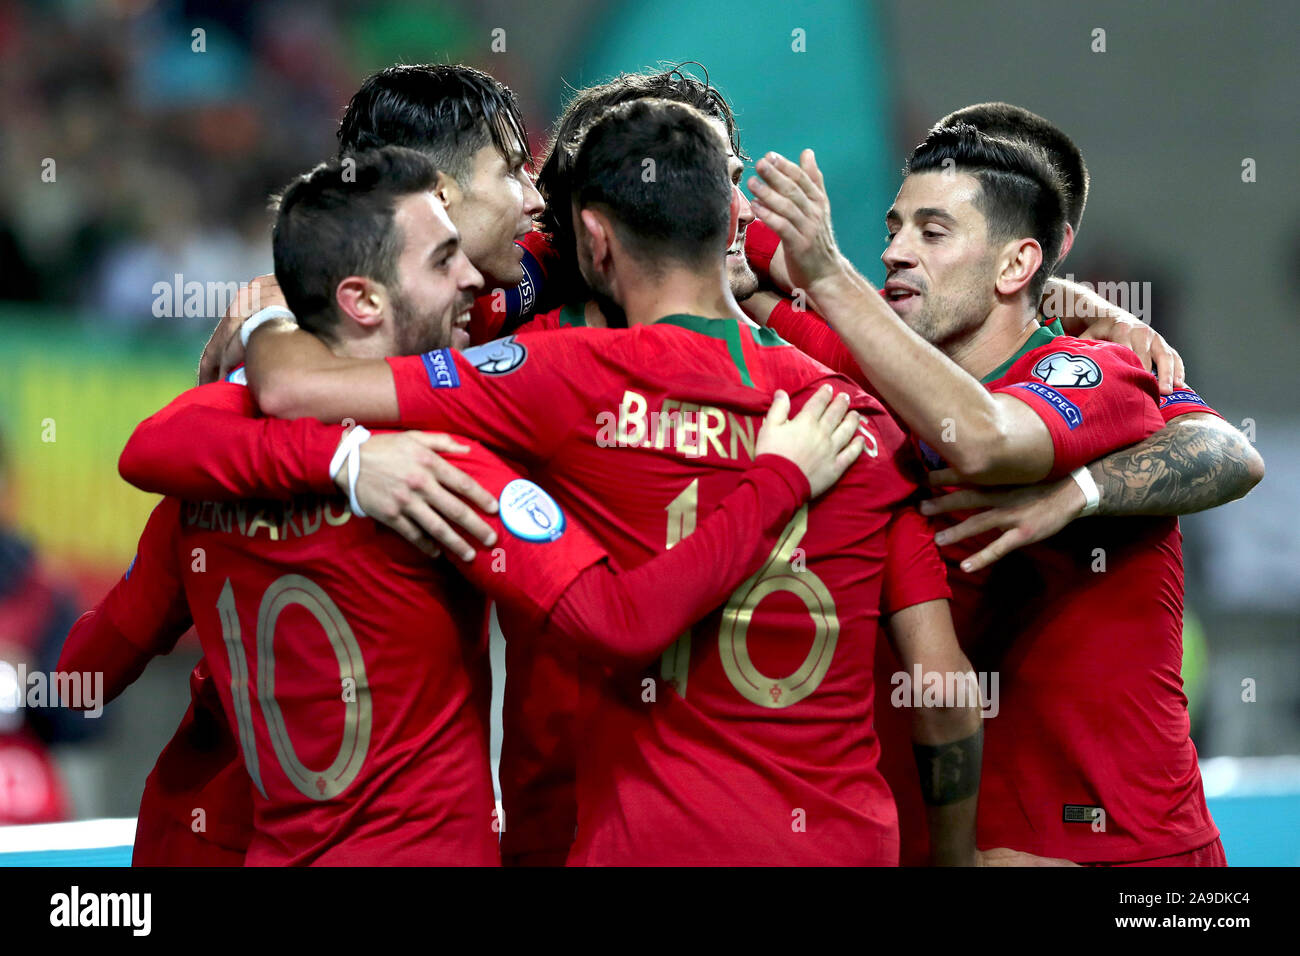 Faro, Portugal. 14th Nov, 2019. Players of Portugal celebrate during the group B match against Lithuania at the UEFA Euro 2020 qualifier at the Algarve stadium in Faro, Portugal, Nov. 14, 2019. Credit: Pedro Fiuza/Xinhua/Alamy Live News Stock Photo